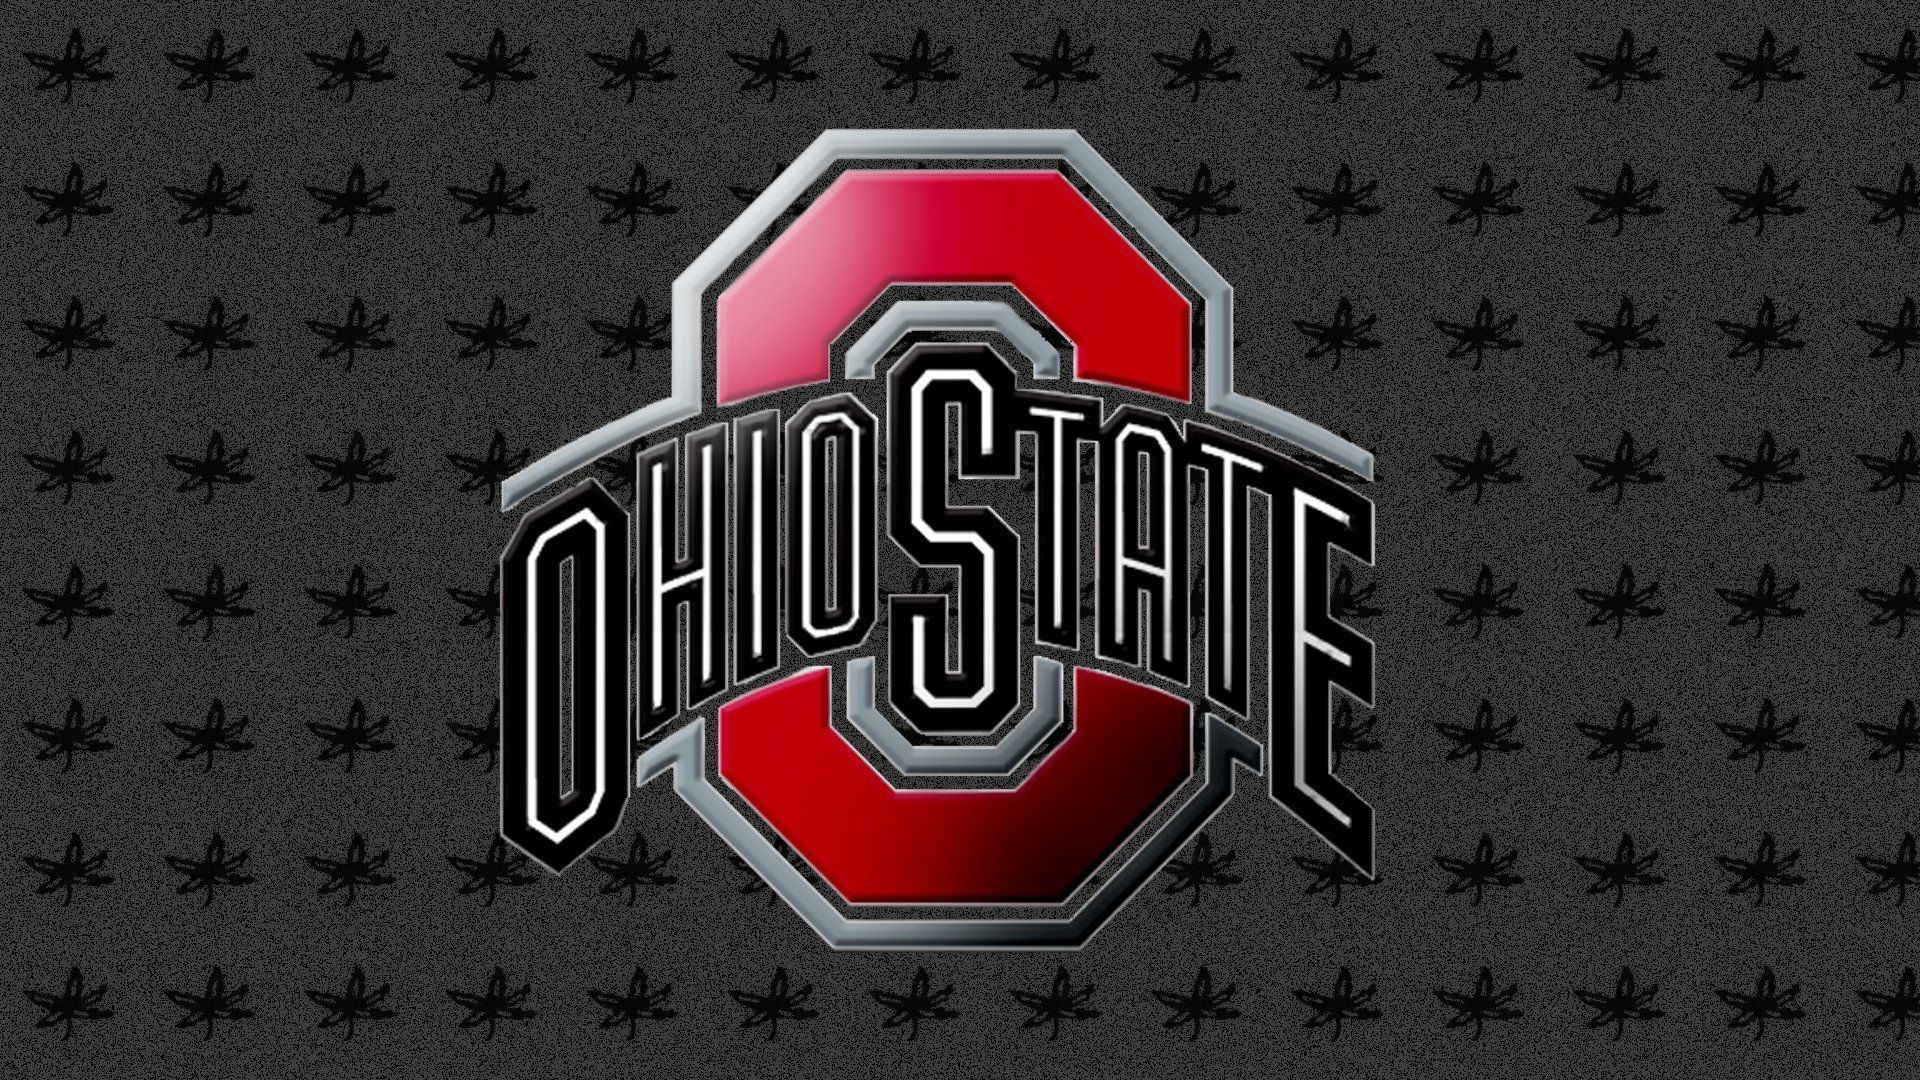 1920x1080 Ohio State University Wallpapers in Full HD |  px - HD Wallpapers